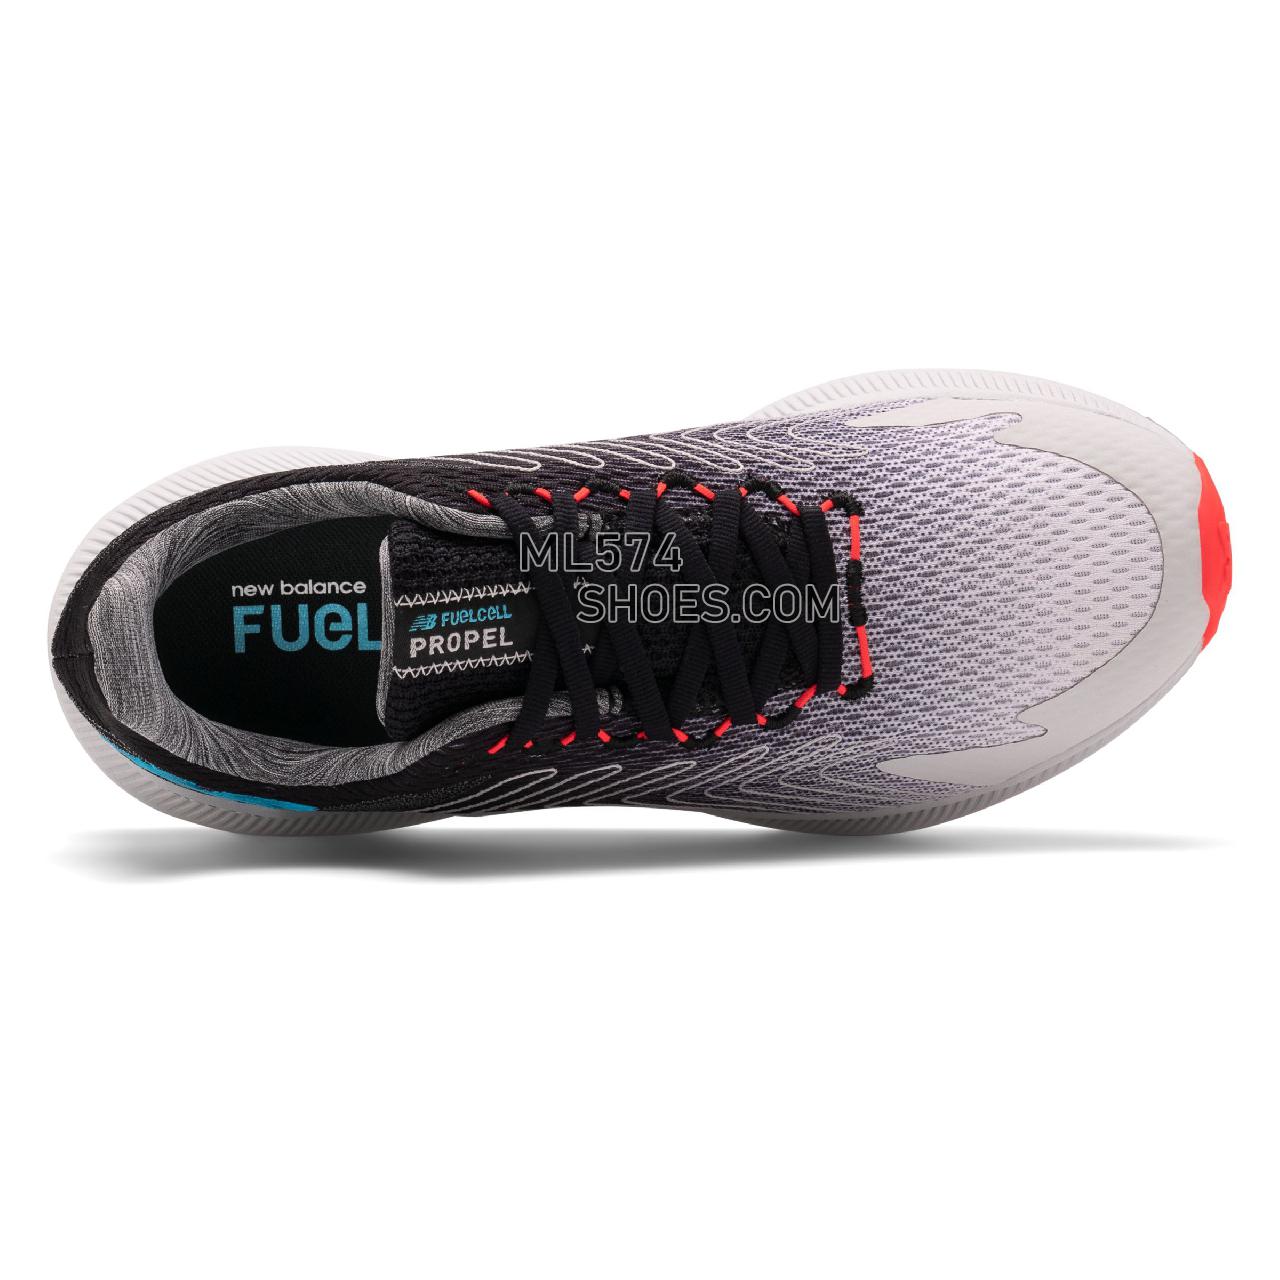 New Balance FuelCell Propel - Men's FuelCell Propel Running - Summer Fog with Black and Bayside - MFCPRLF1